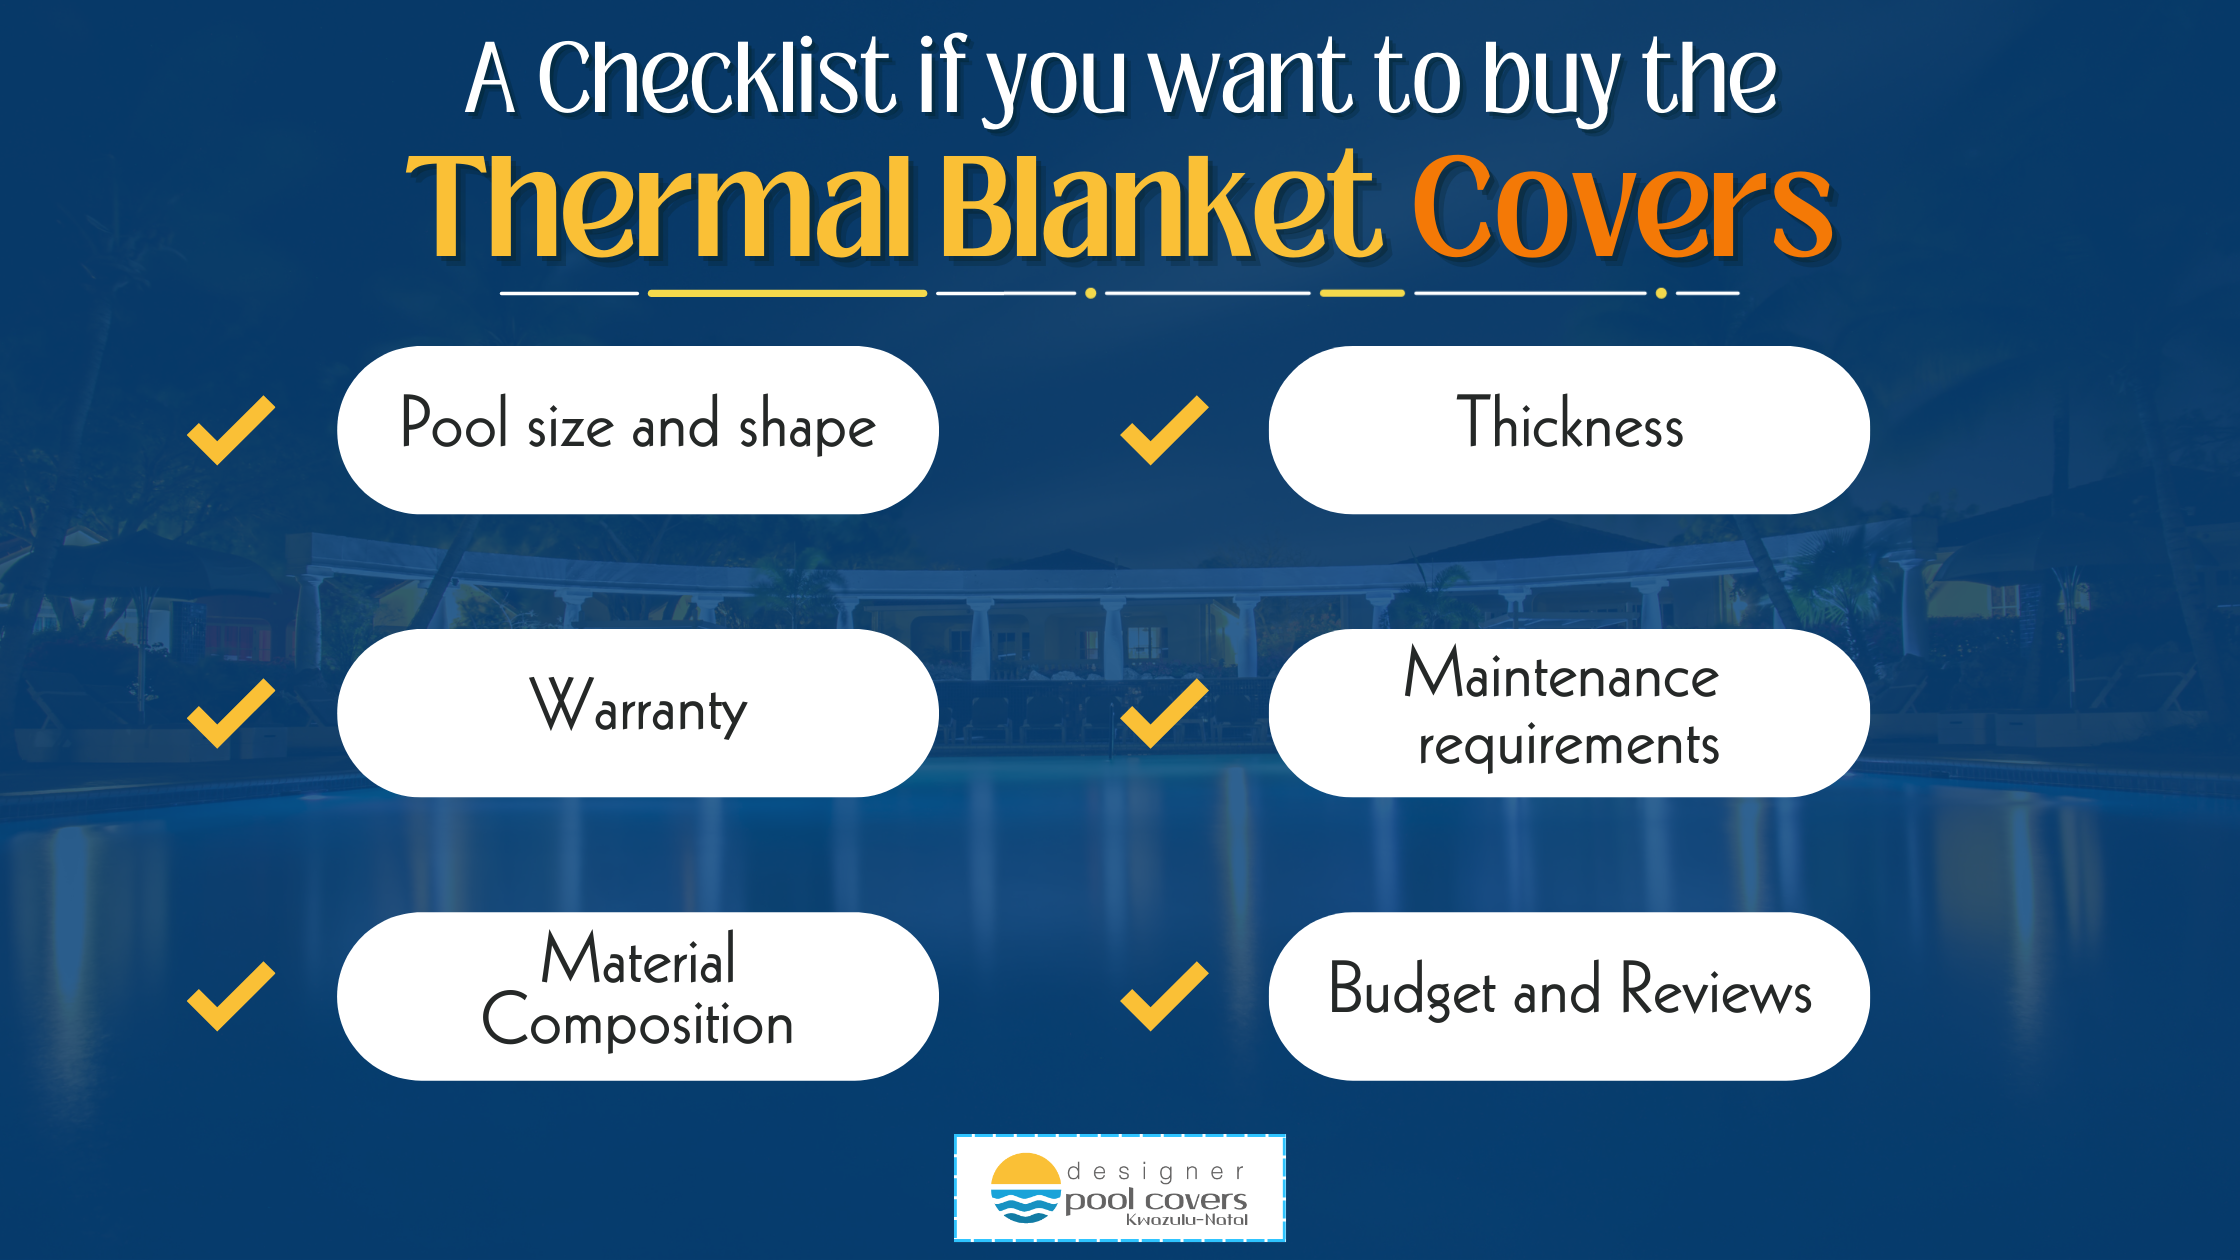 things to consider before buying a Thermal Blanket Pool cover